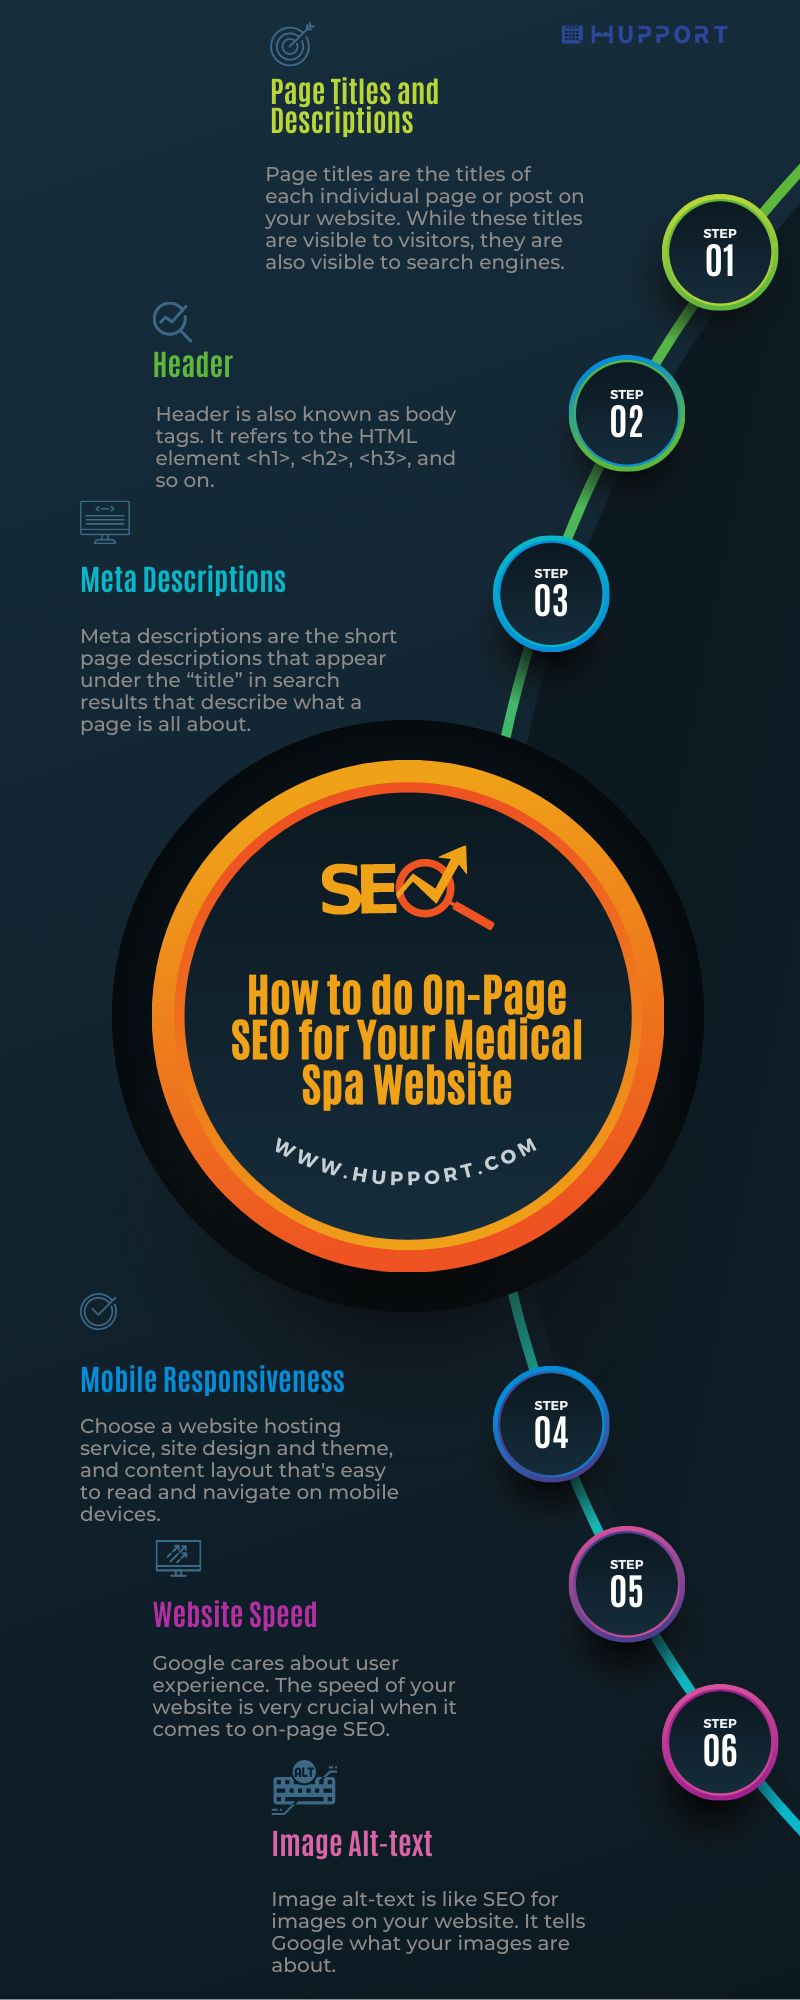 How to do On-Page SEO for Your Medical Spa Website